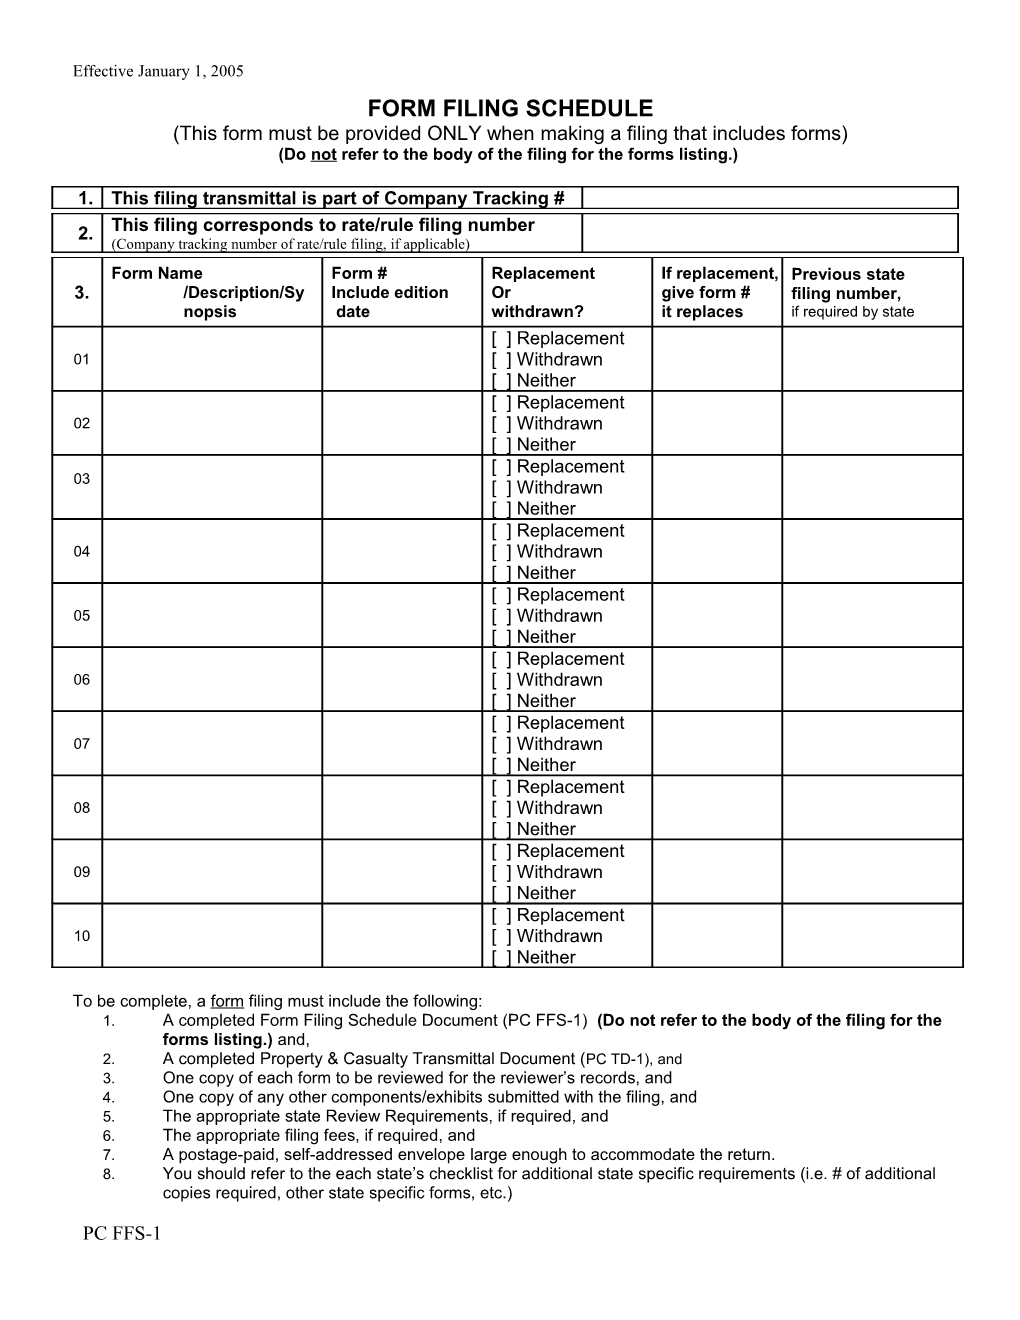 Property & Casualty Transmittal Document (Revised 1/1/04)